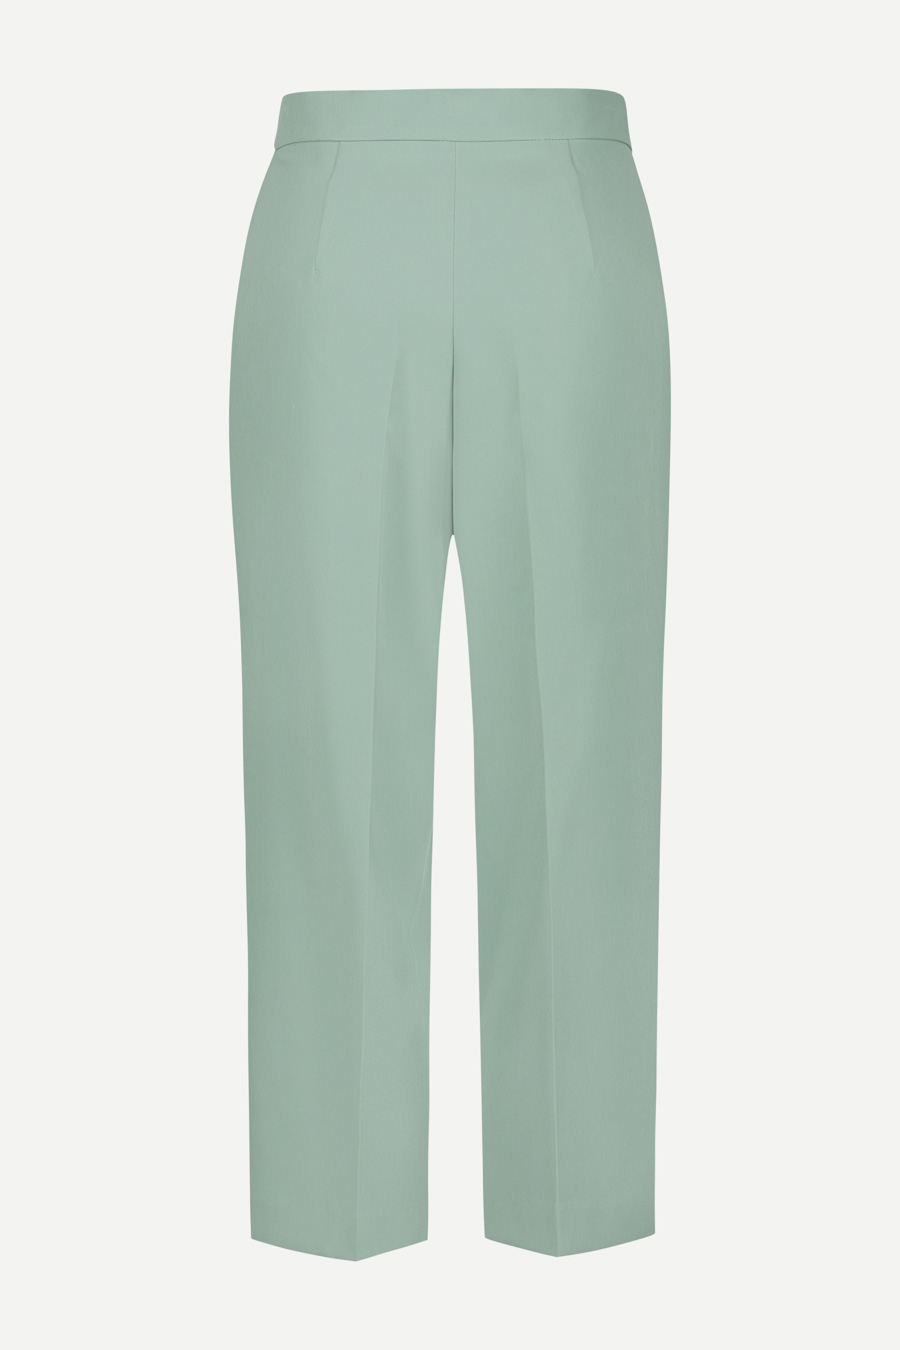 Wide square pants in sage green - D2LINE